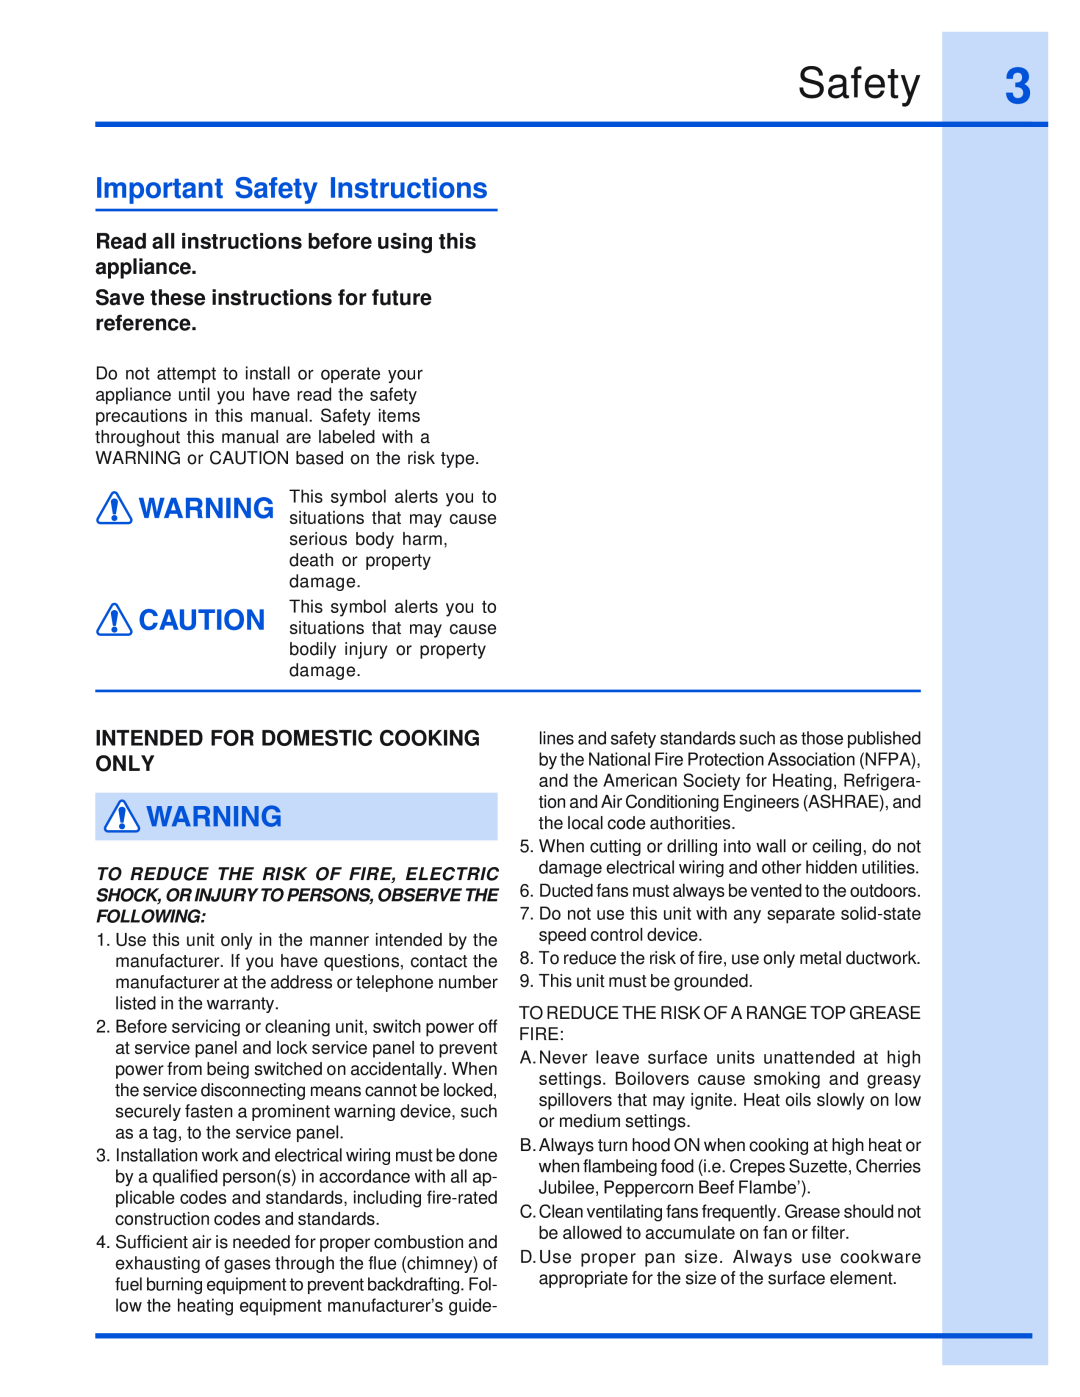 Electrolux 316495008 Important Safety Instructions, Read all instructions before using this appliance 